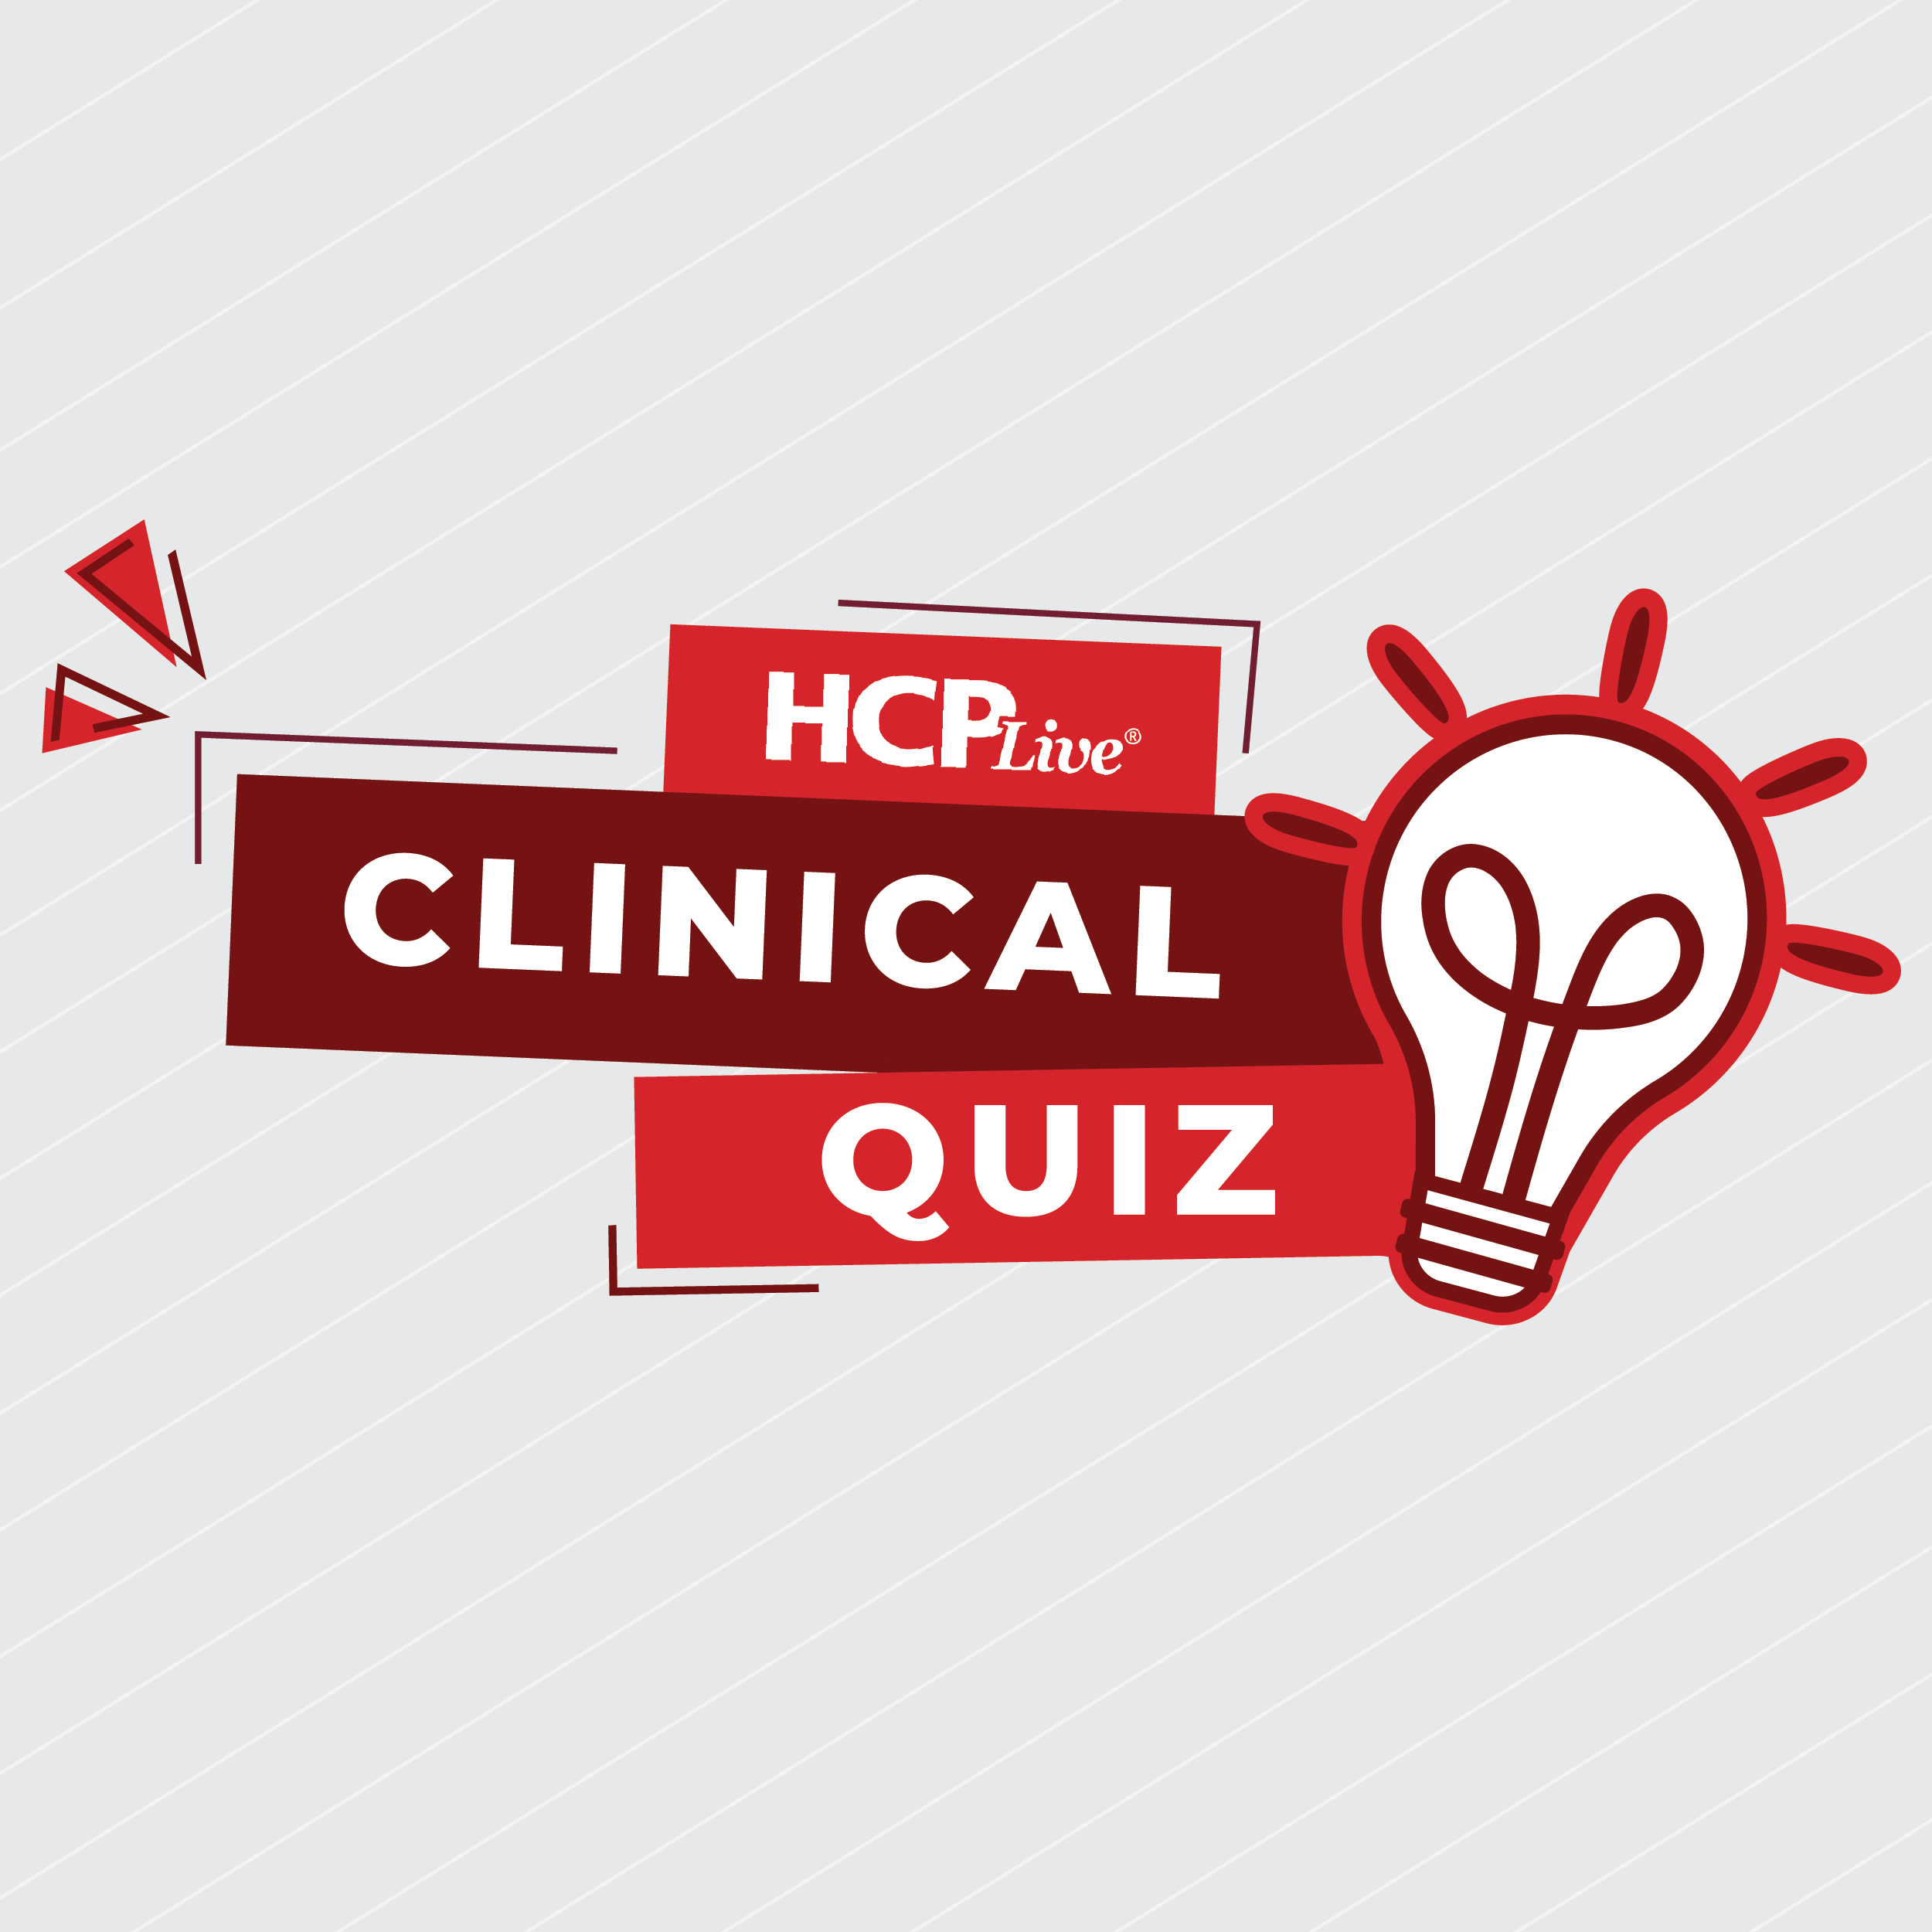 HCPLive Clinical Quiz